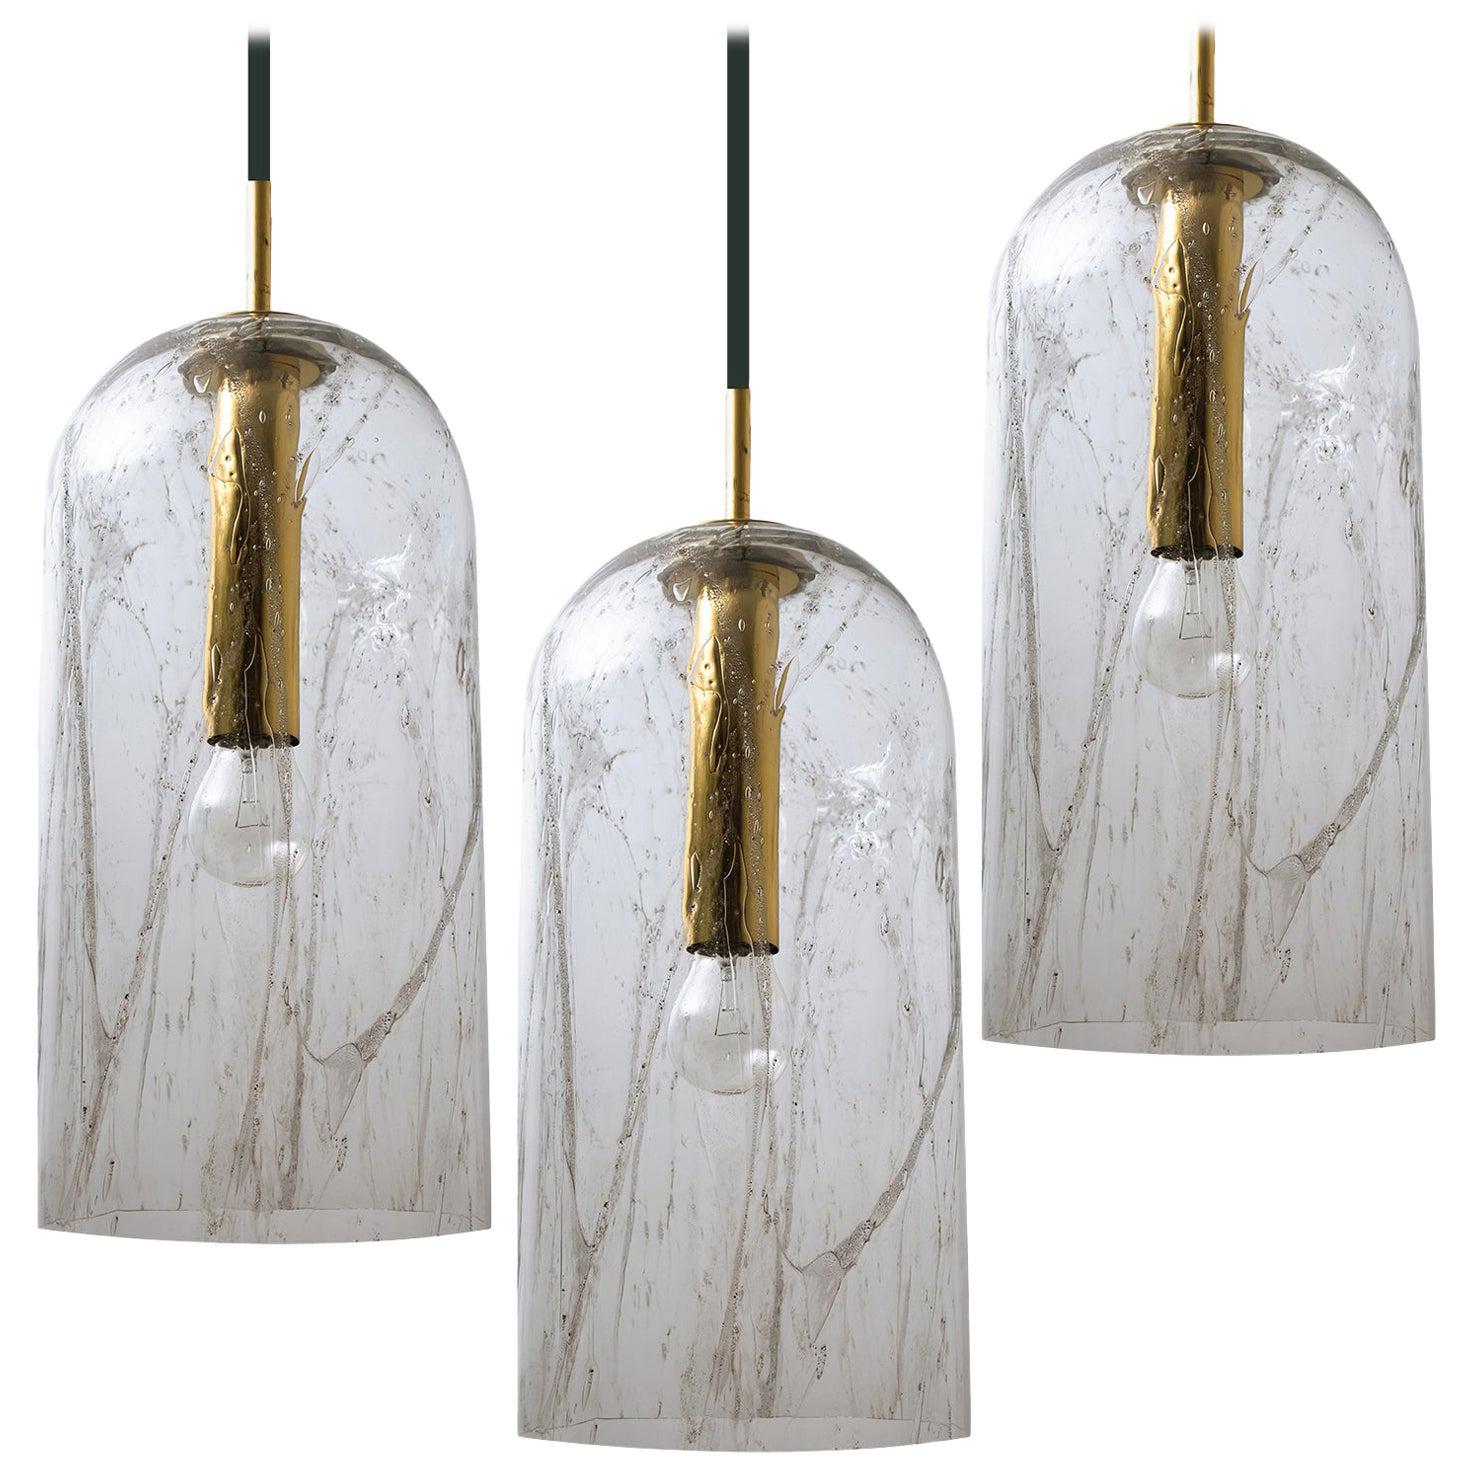 1 of the 3 Glass Pendant Lamps by Doria, 1960 For Sale